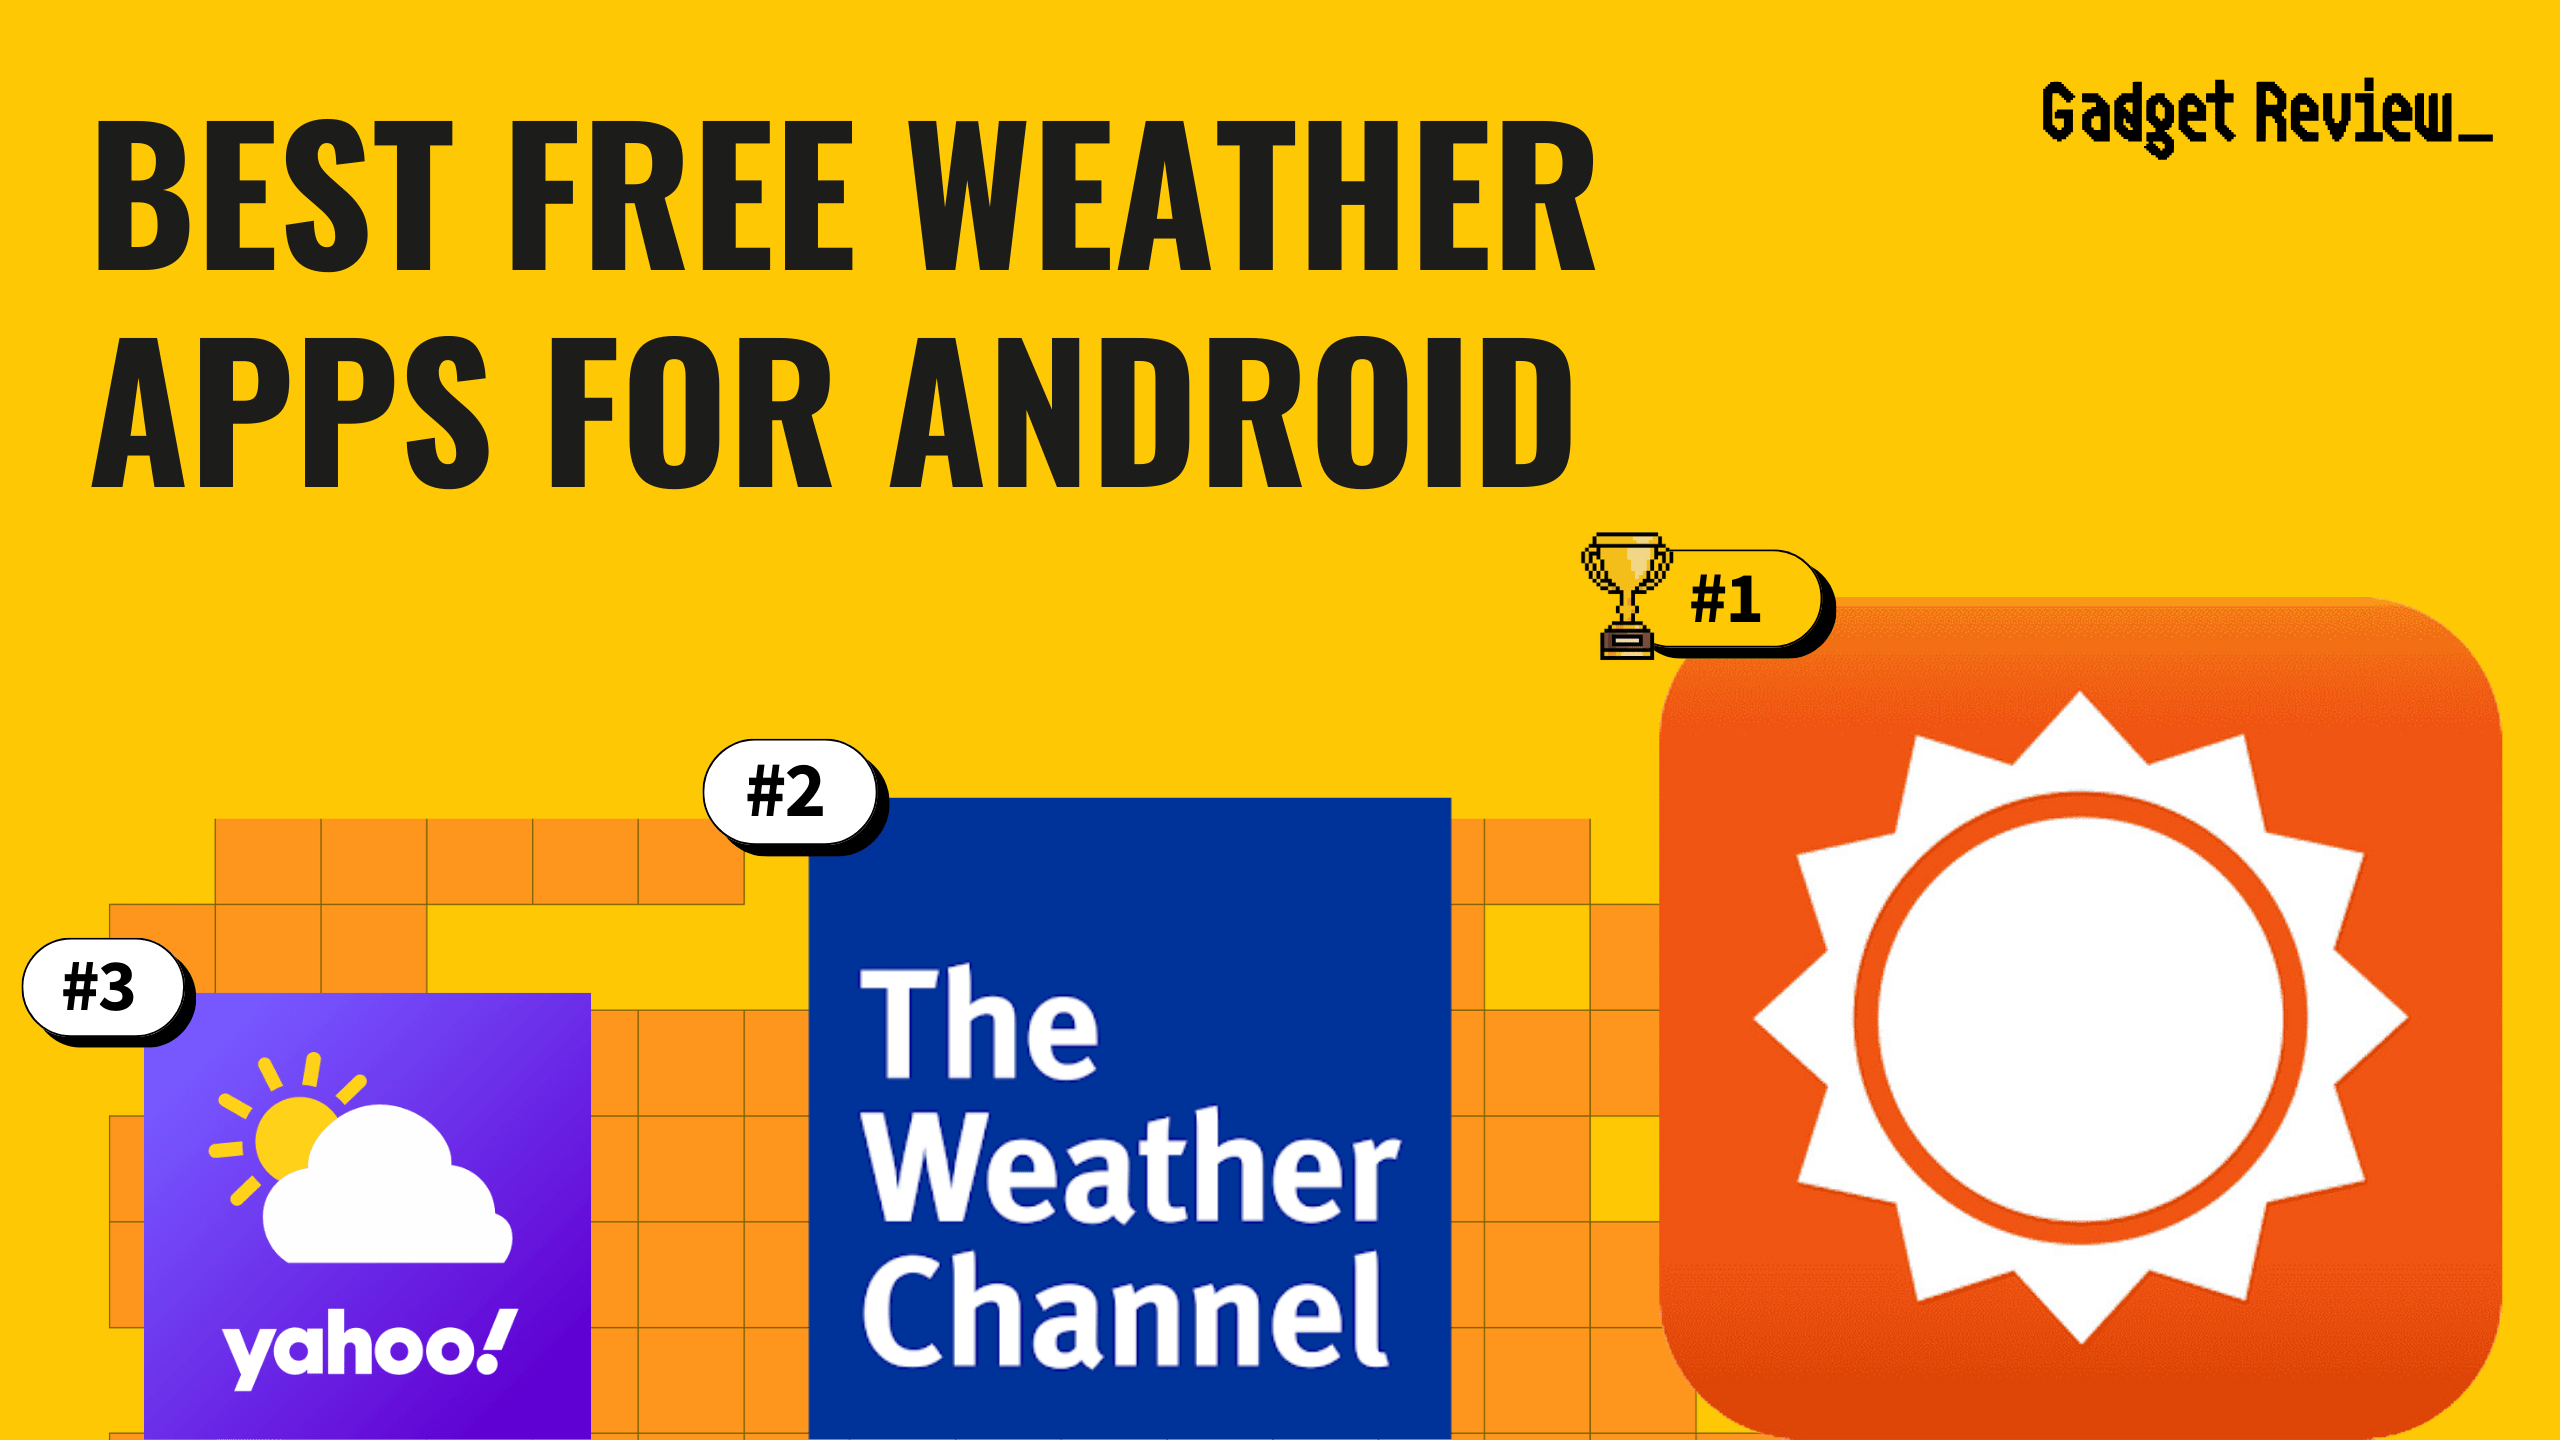 6 Best Free Weather Apps for Android